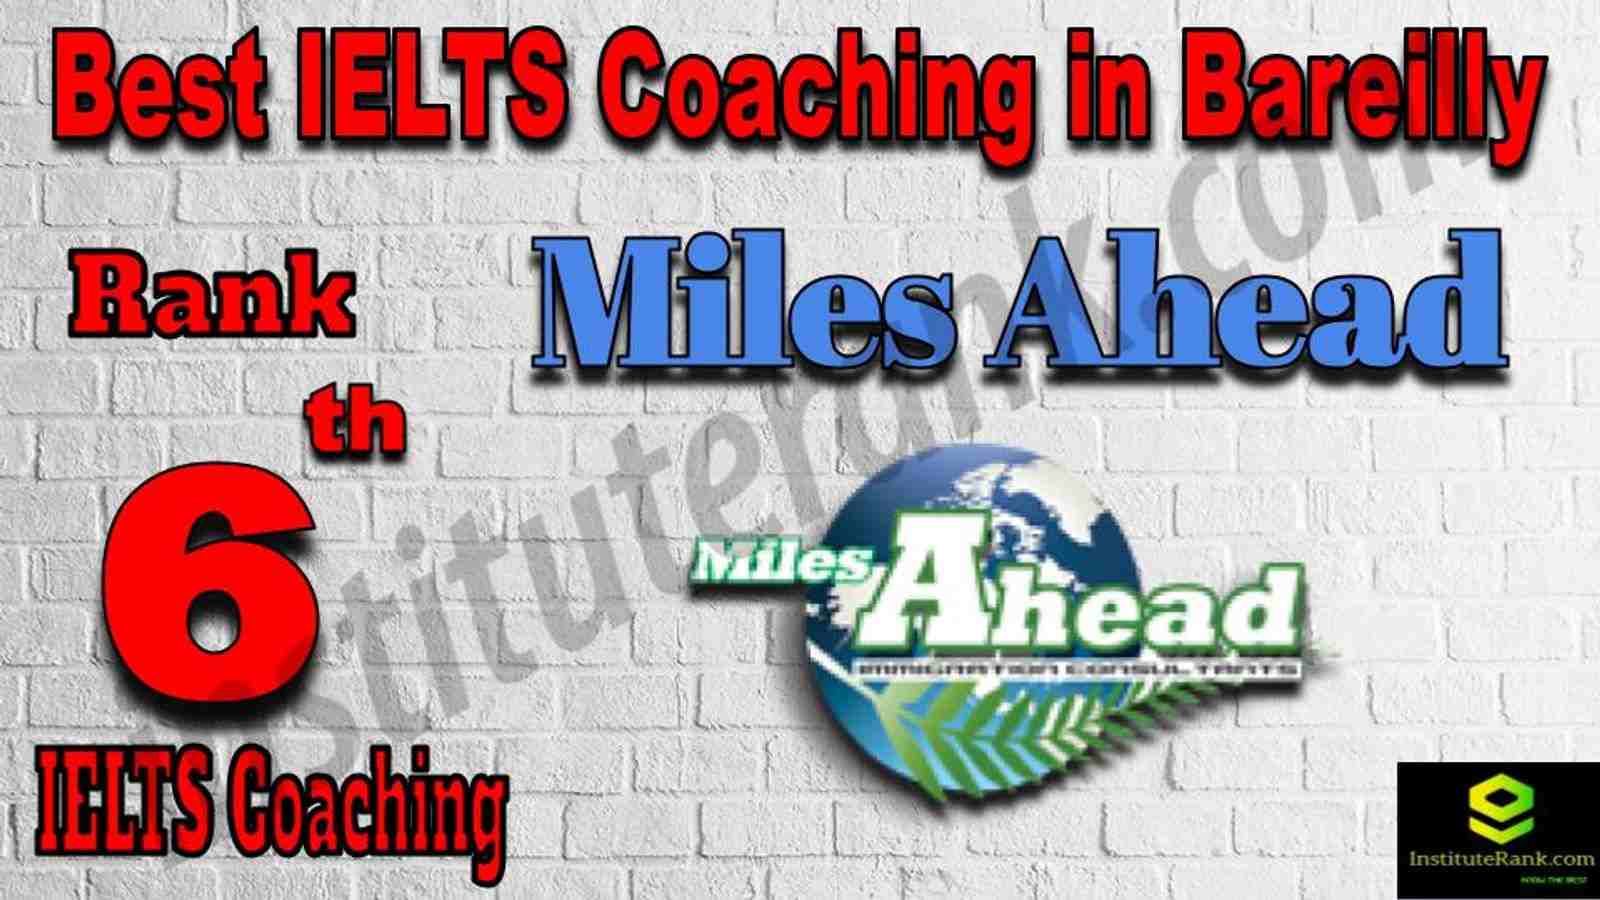 6th Best IELTS Coaching in Bareilly